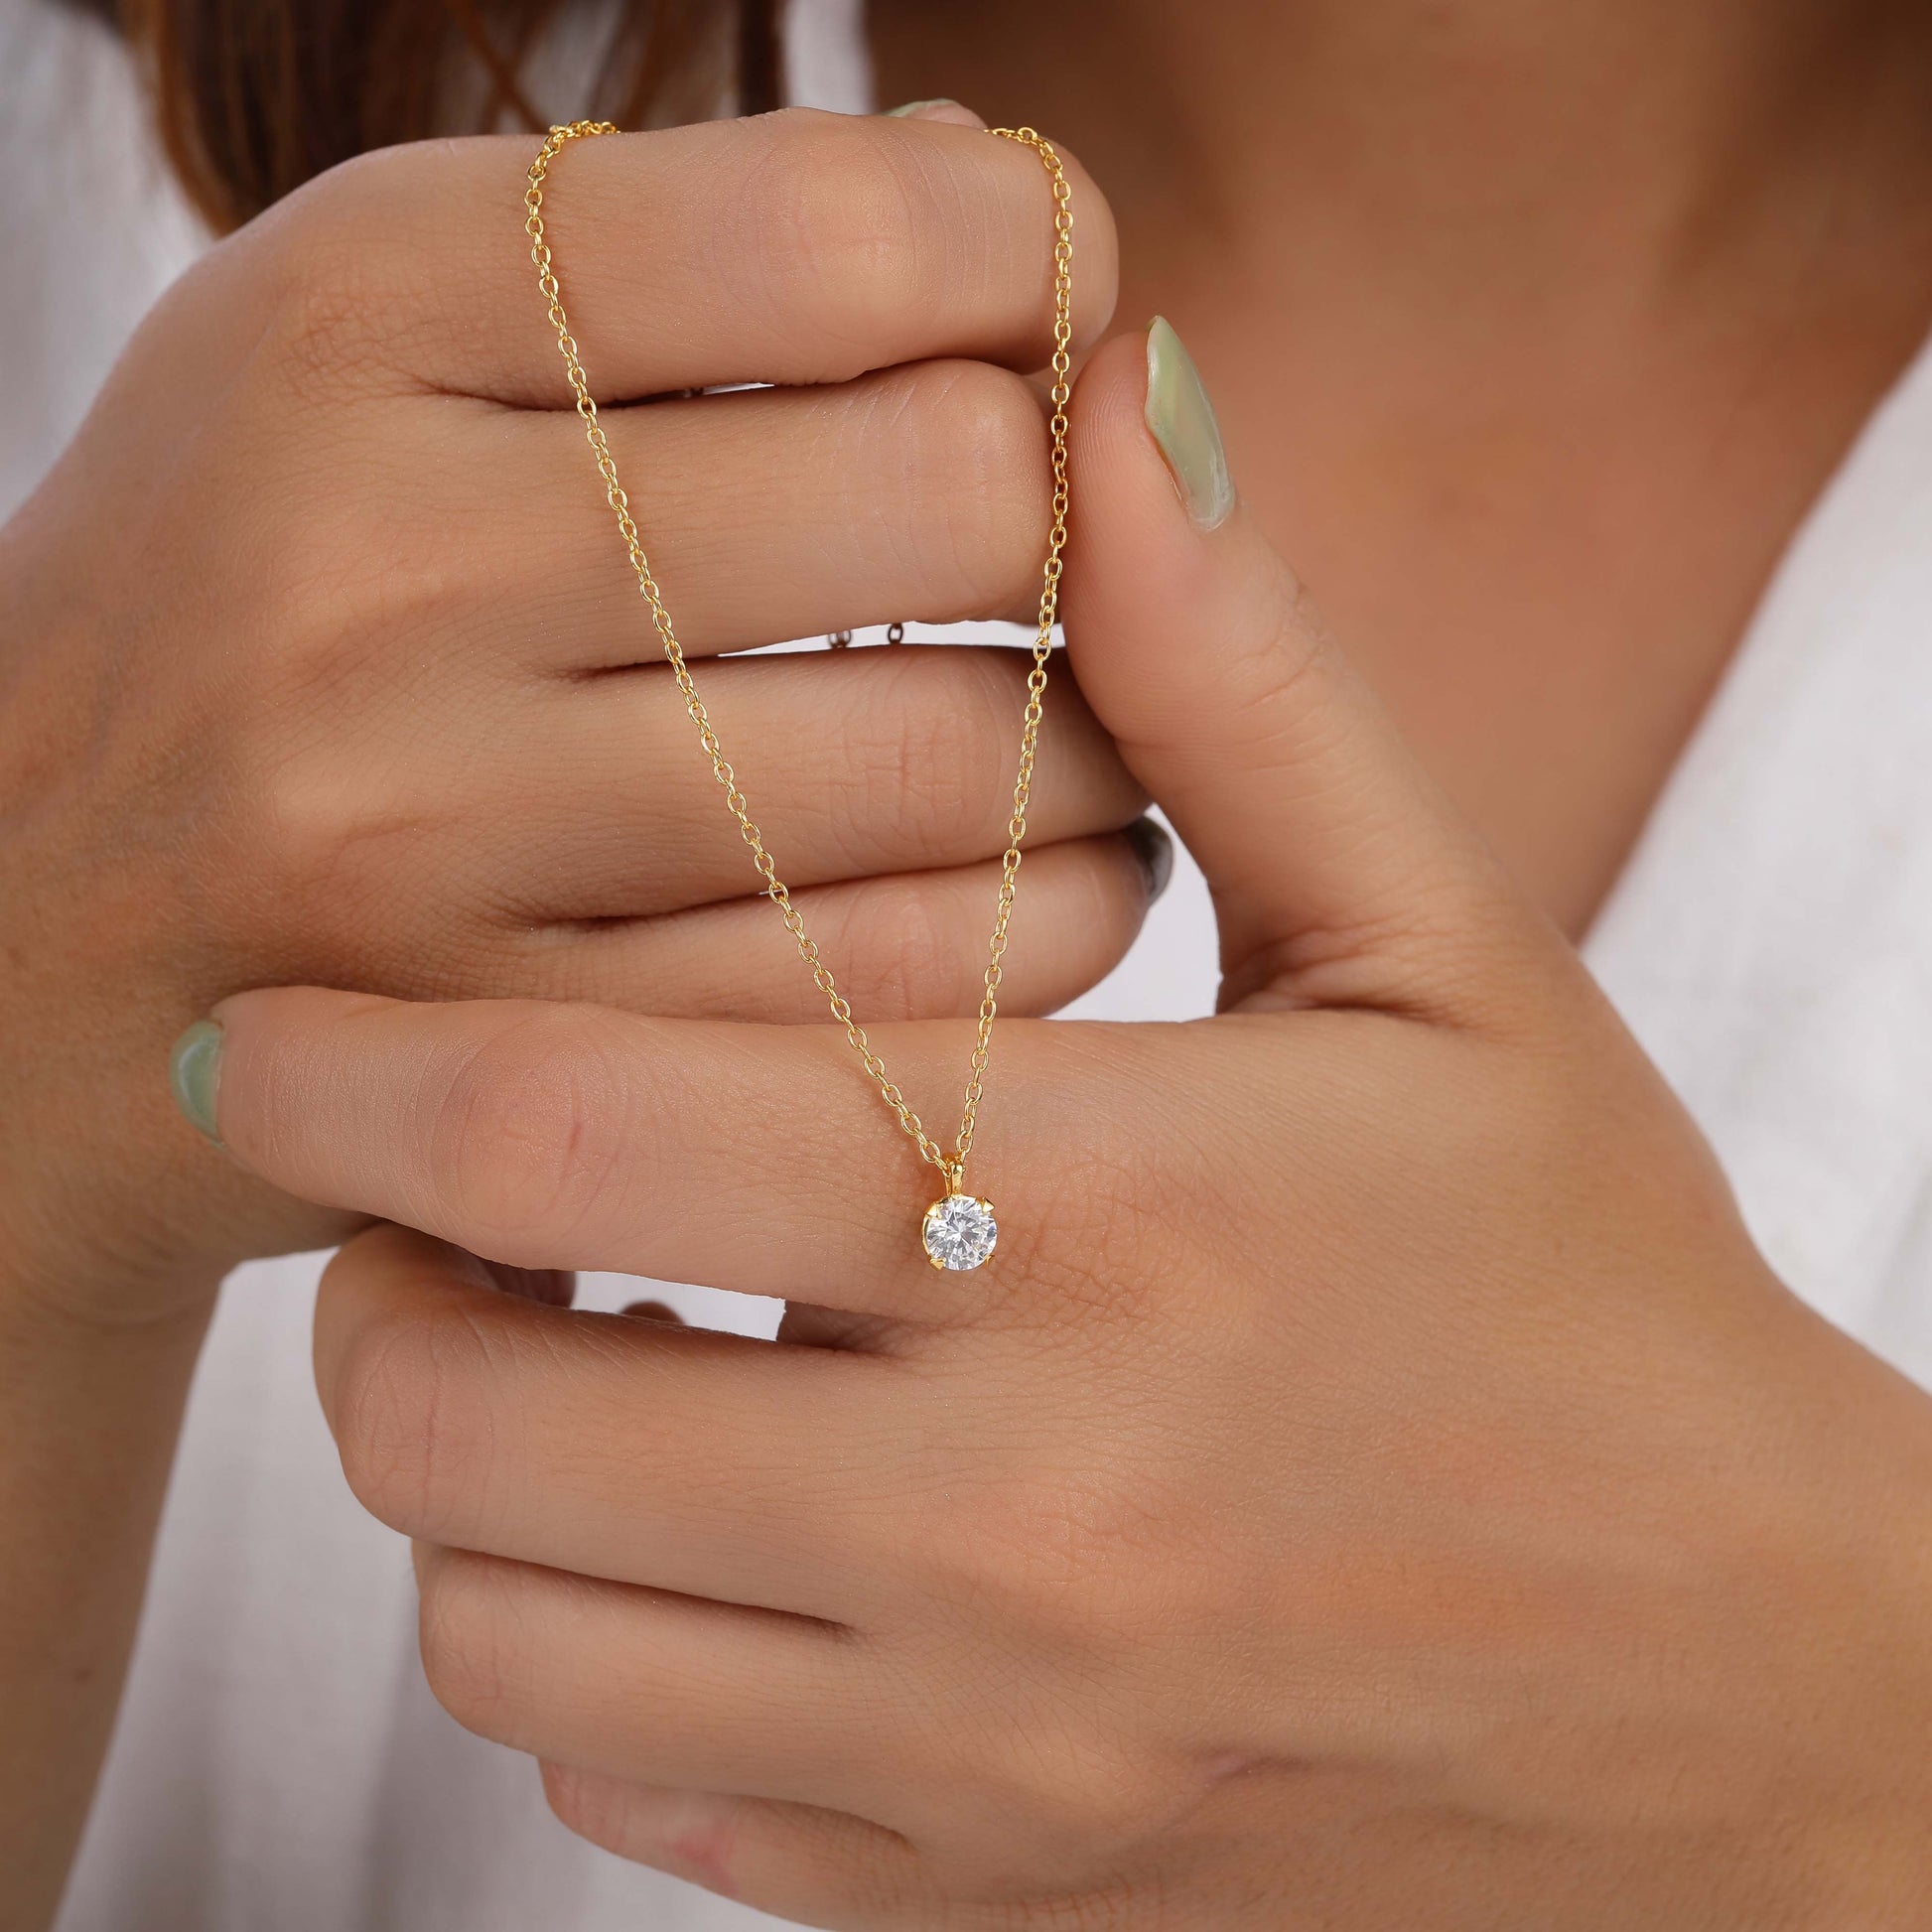 A person holding solitaire necklace